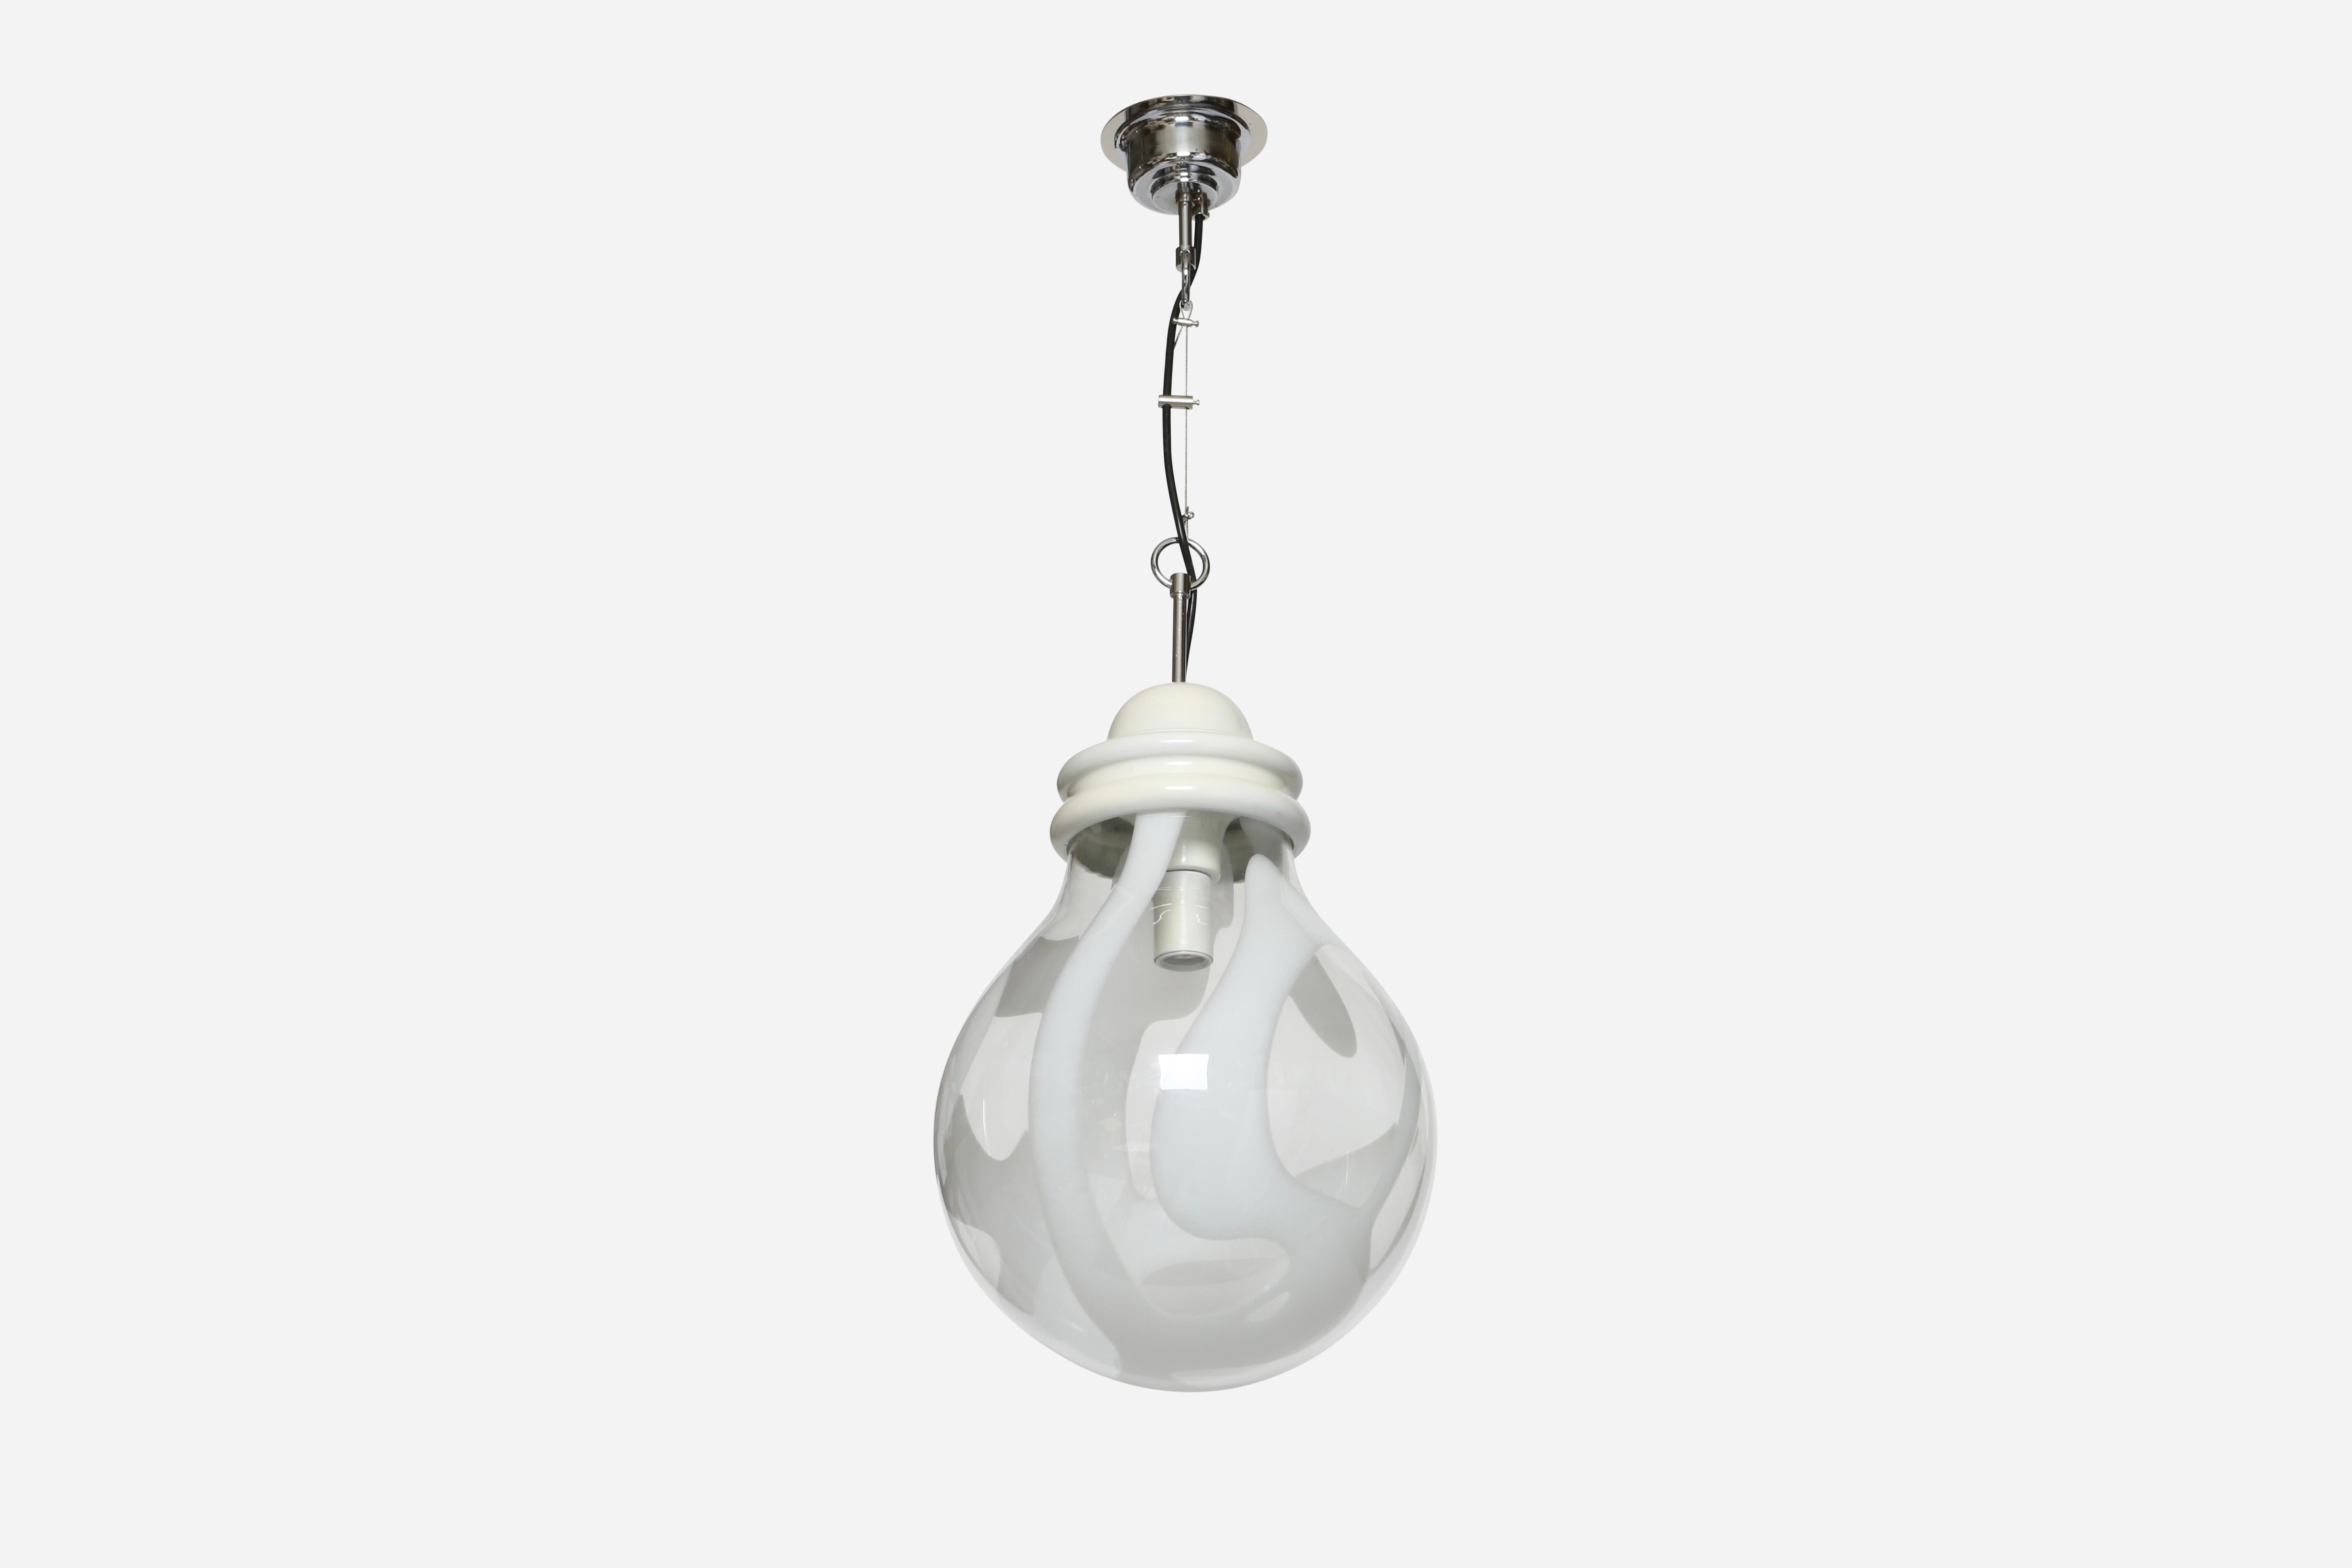 Murano glass ceiling pendant.
Glass, metal.
Rewired for US.
Overall drop is adjustable, can be made longer or shorter.
Height of the body of the pendant is 19 inches.
Stem on top of the glass holder is 4 inches.
Italy, 1970s.

We take pride in